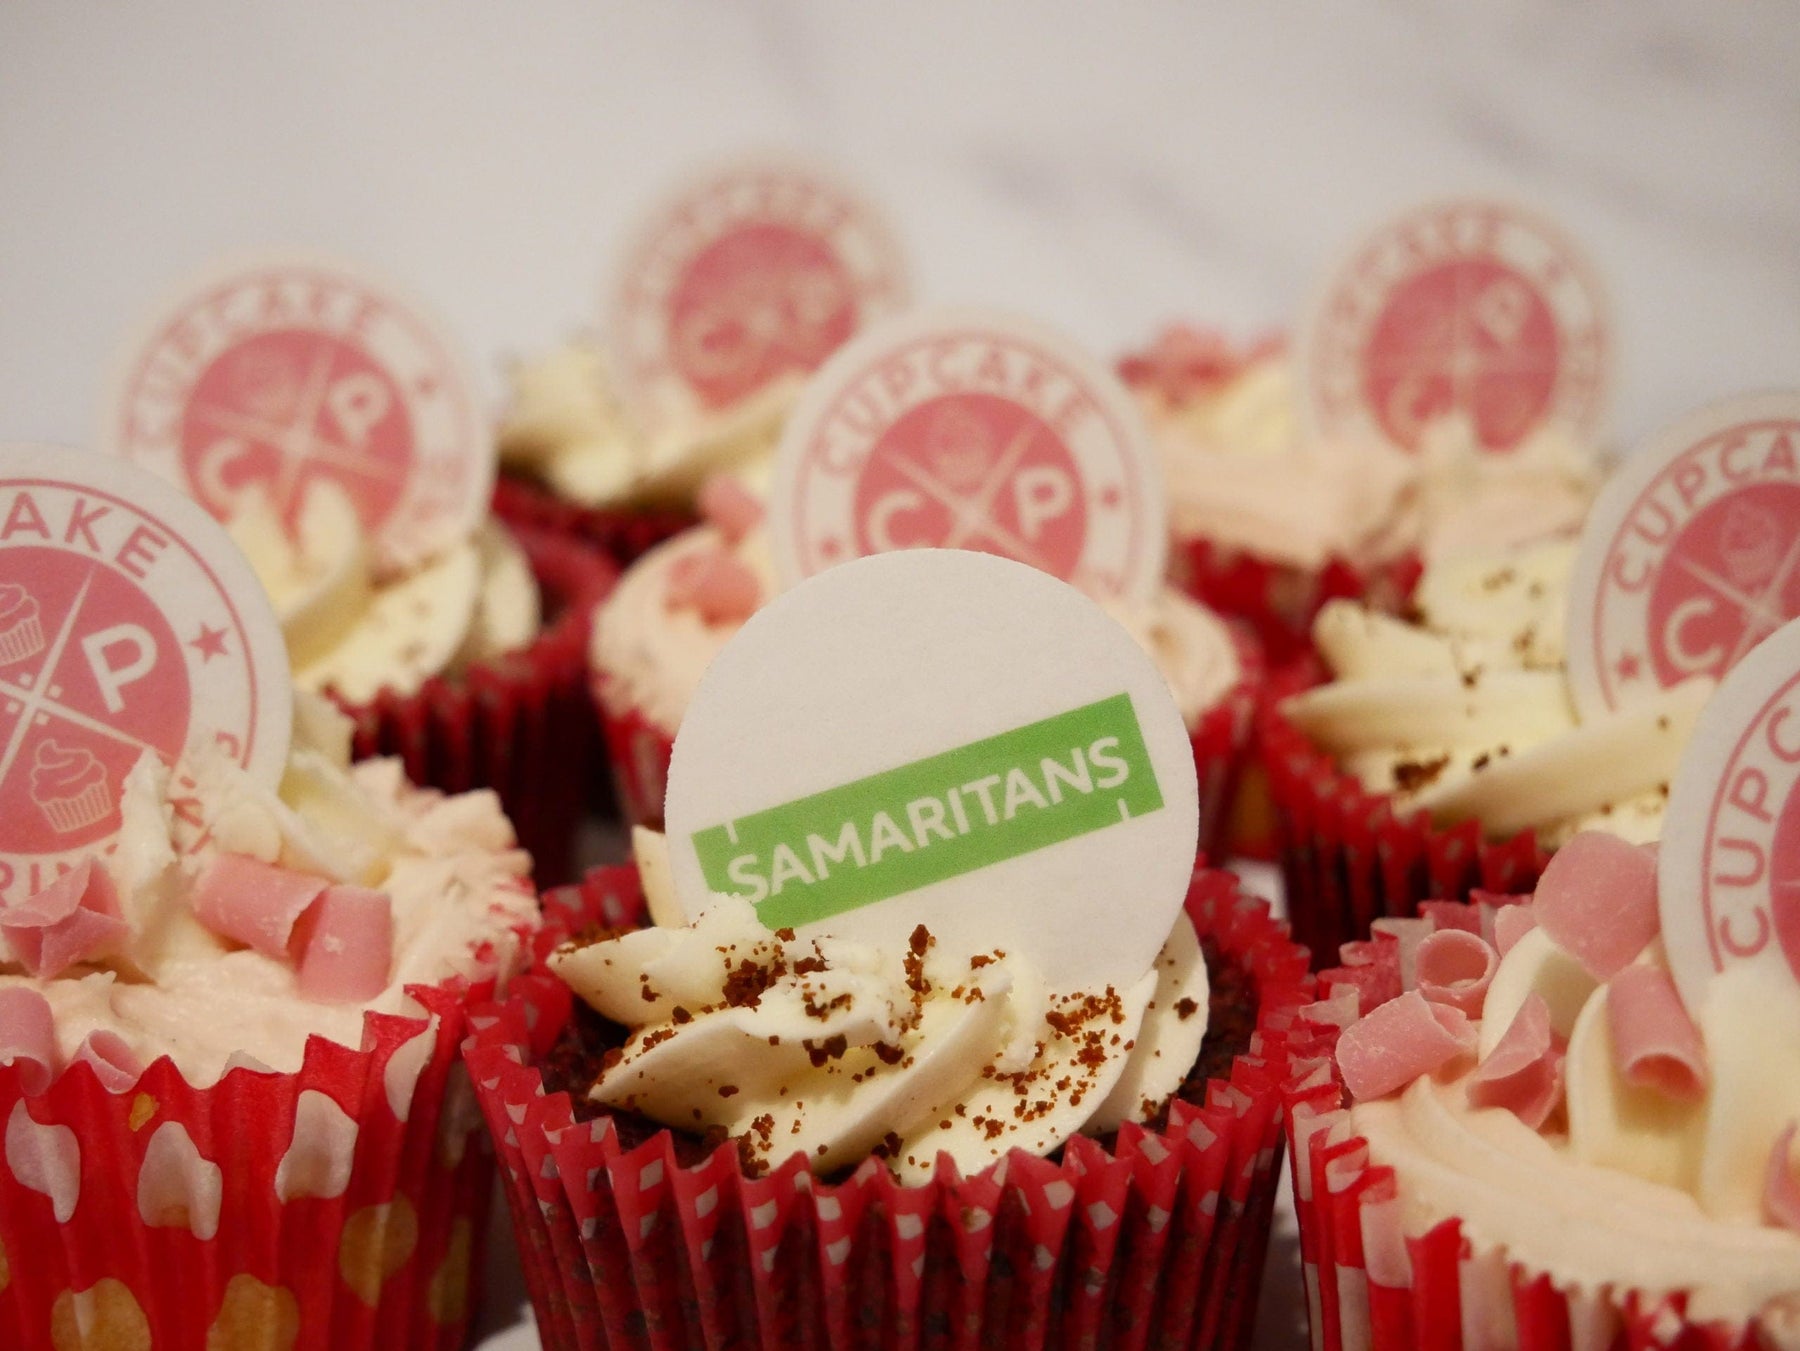 Edible Cocktail Toppers Cupcake 24 pieces x 1.5 inch - £5 The Samaritans Charity Cupcake Toppers